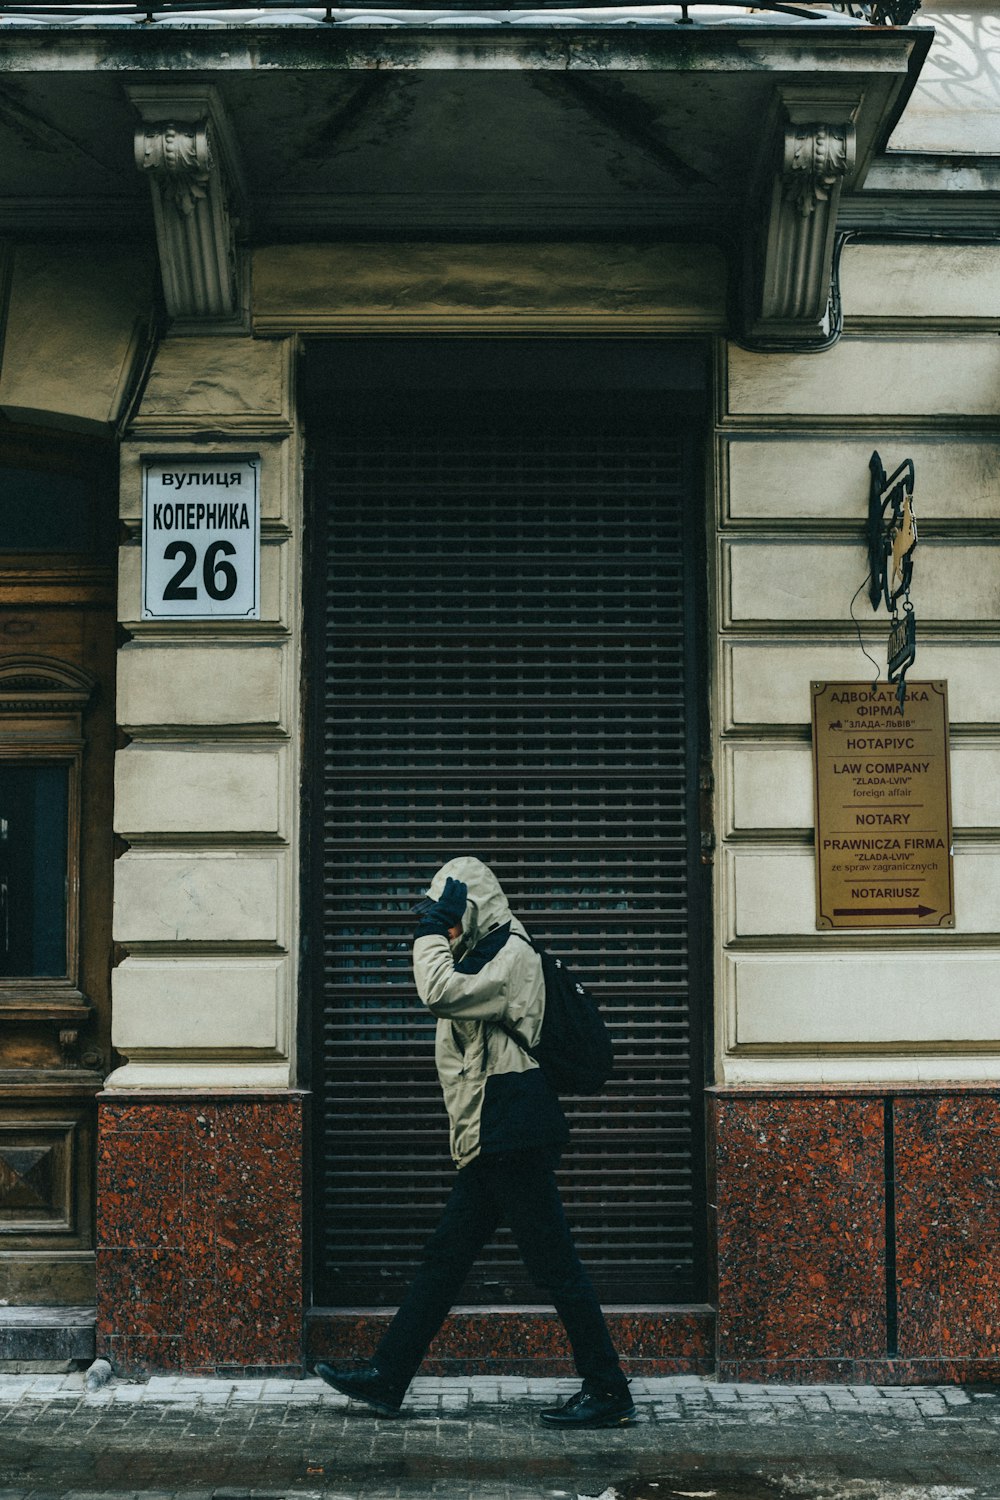 a person walking down a street in front of a building